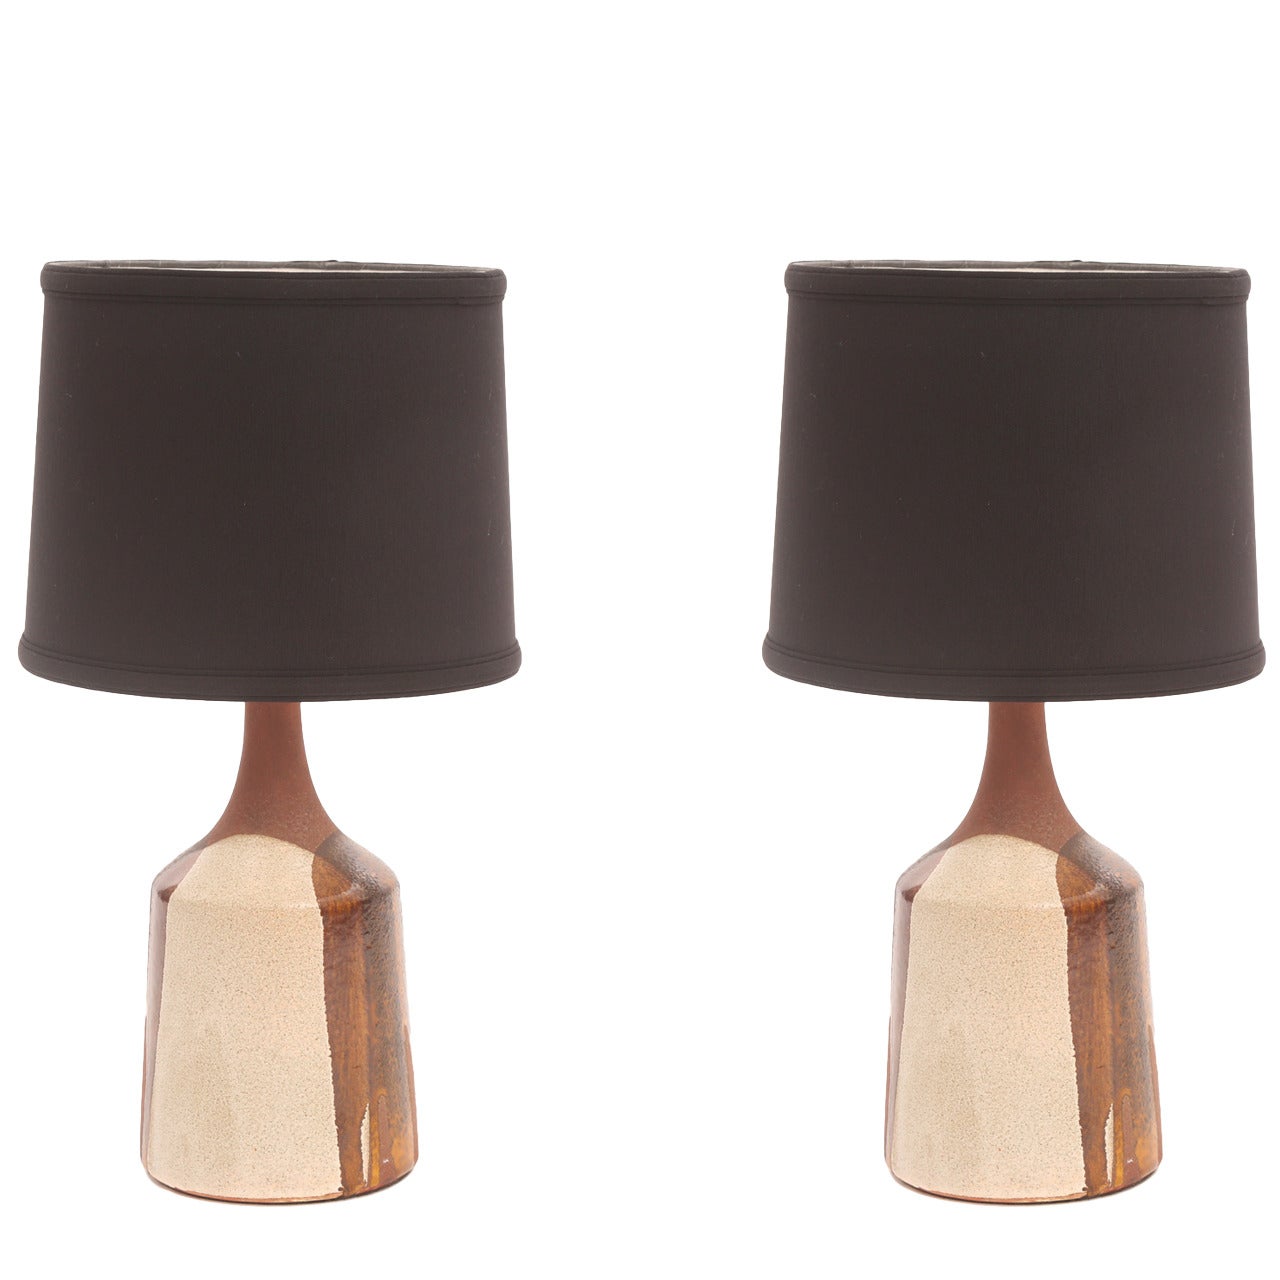 Pair of Glazed Ceramic Lamps by David Cressey